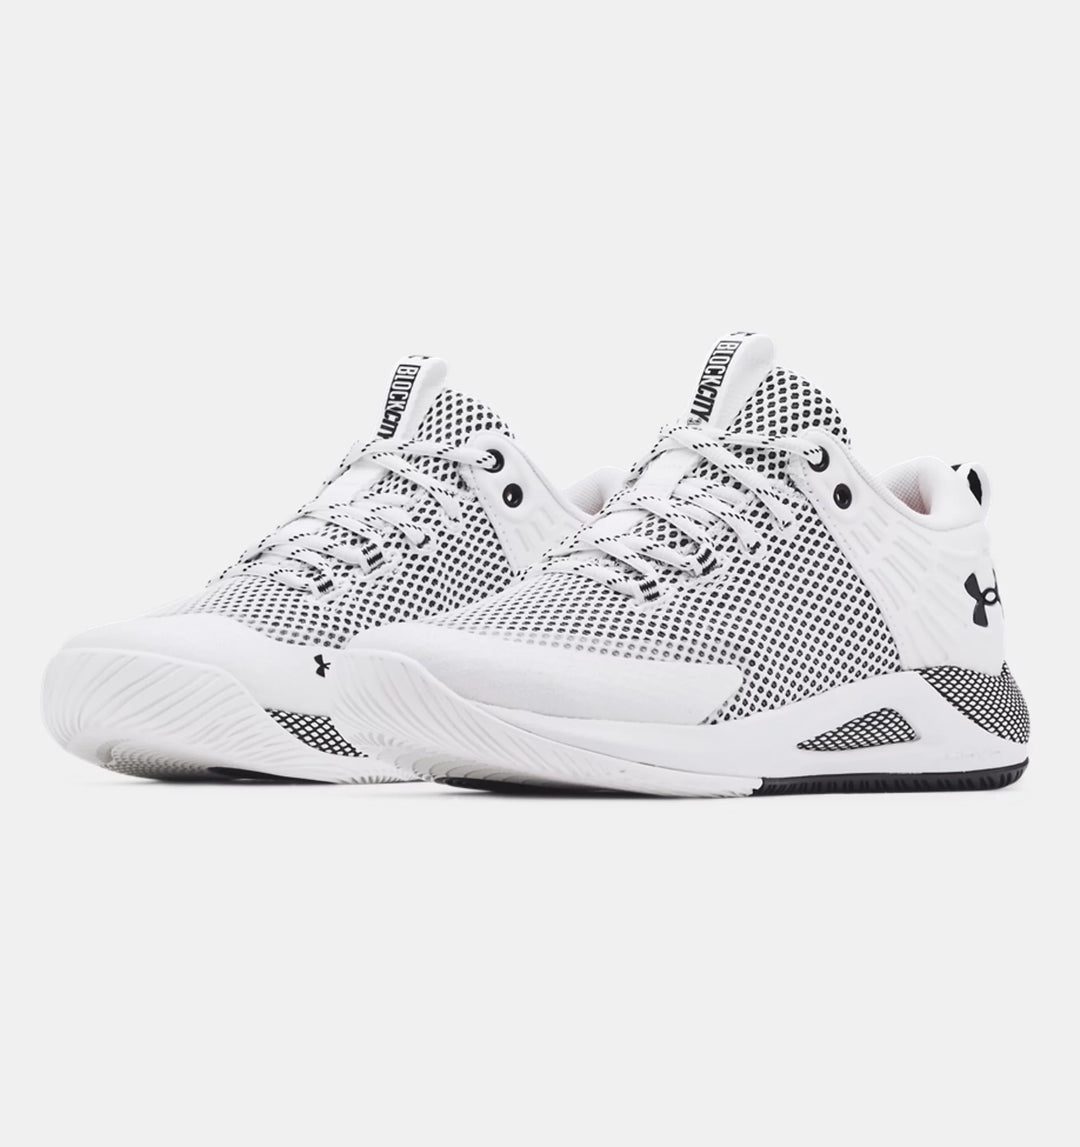 Women's Under Armour HOVR Block City Volleyball Shoes Color: White / Black 